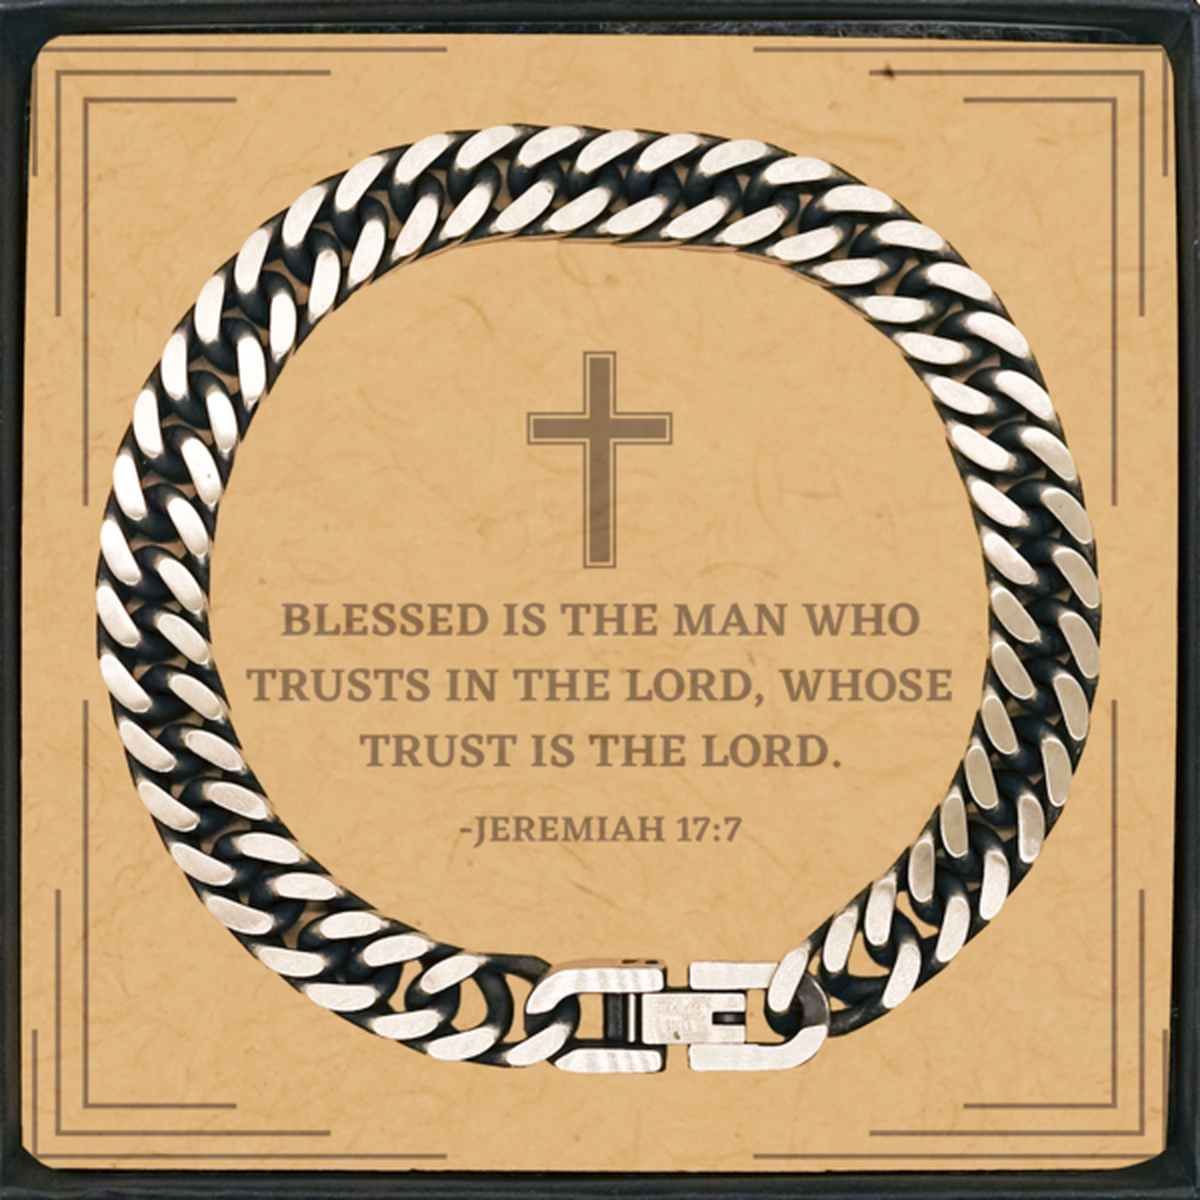 Baptism Gifts For Teenage Boys Girls, Christian Bible Verse Cuban Link Chain Bracelet, Blessed is the man who trusts, Confirmation Gifts, Bible Verse Card for Son, Godson, Grandson